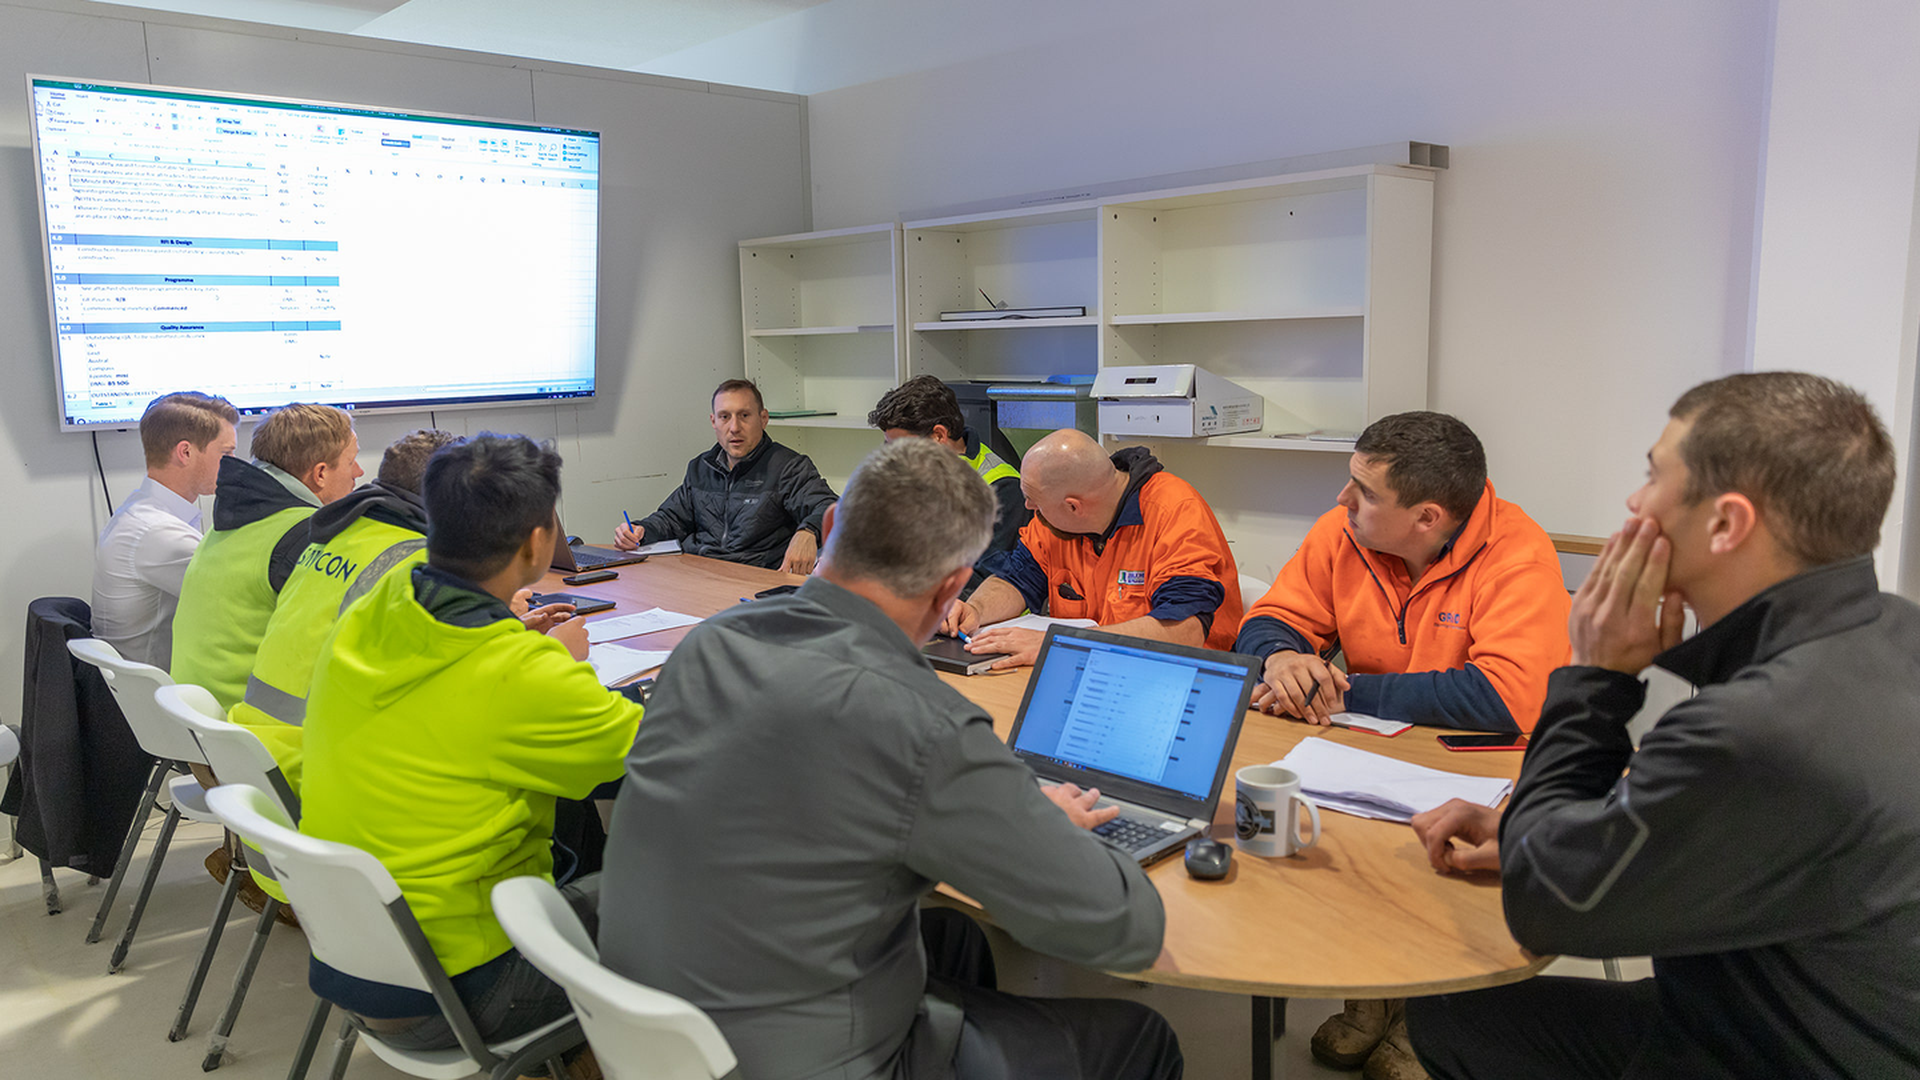 Construction workers discussing construction submittals over software.